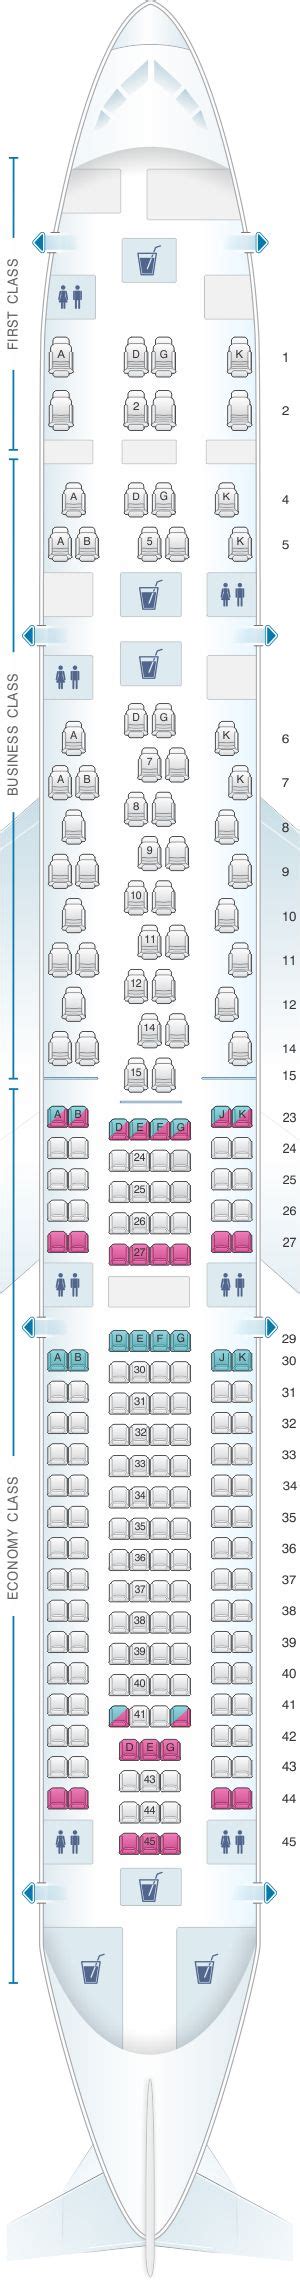 Seat Map Swiss Airbus A340 300 Airbus Best Airplane Swiss